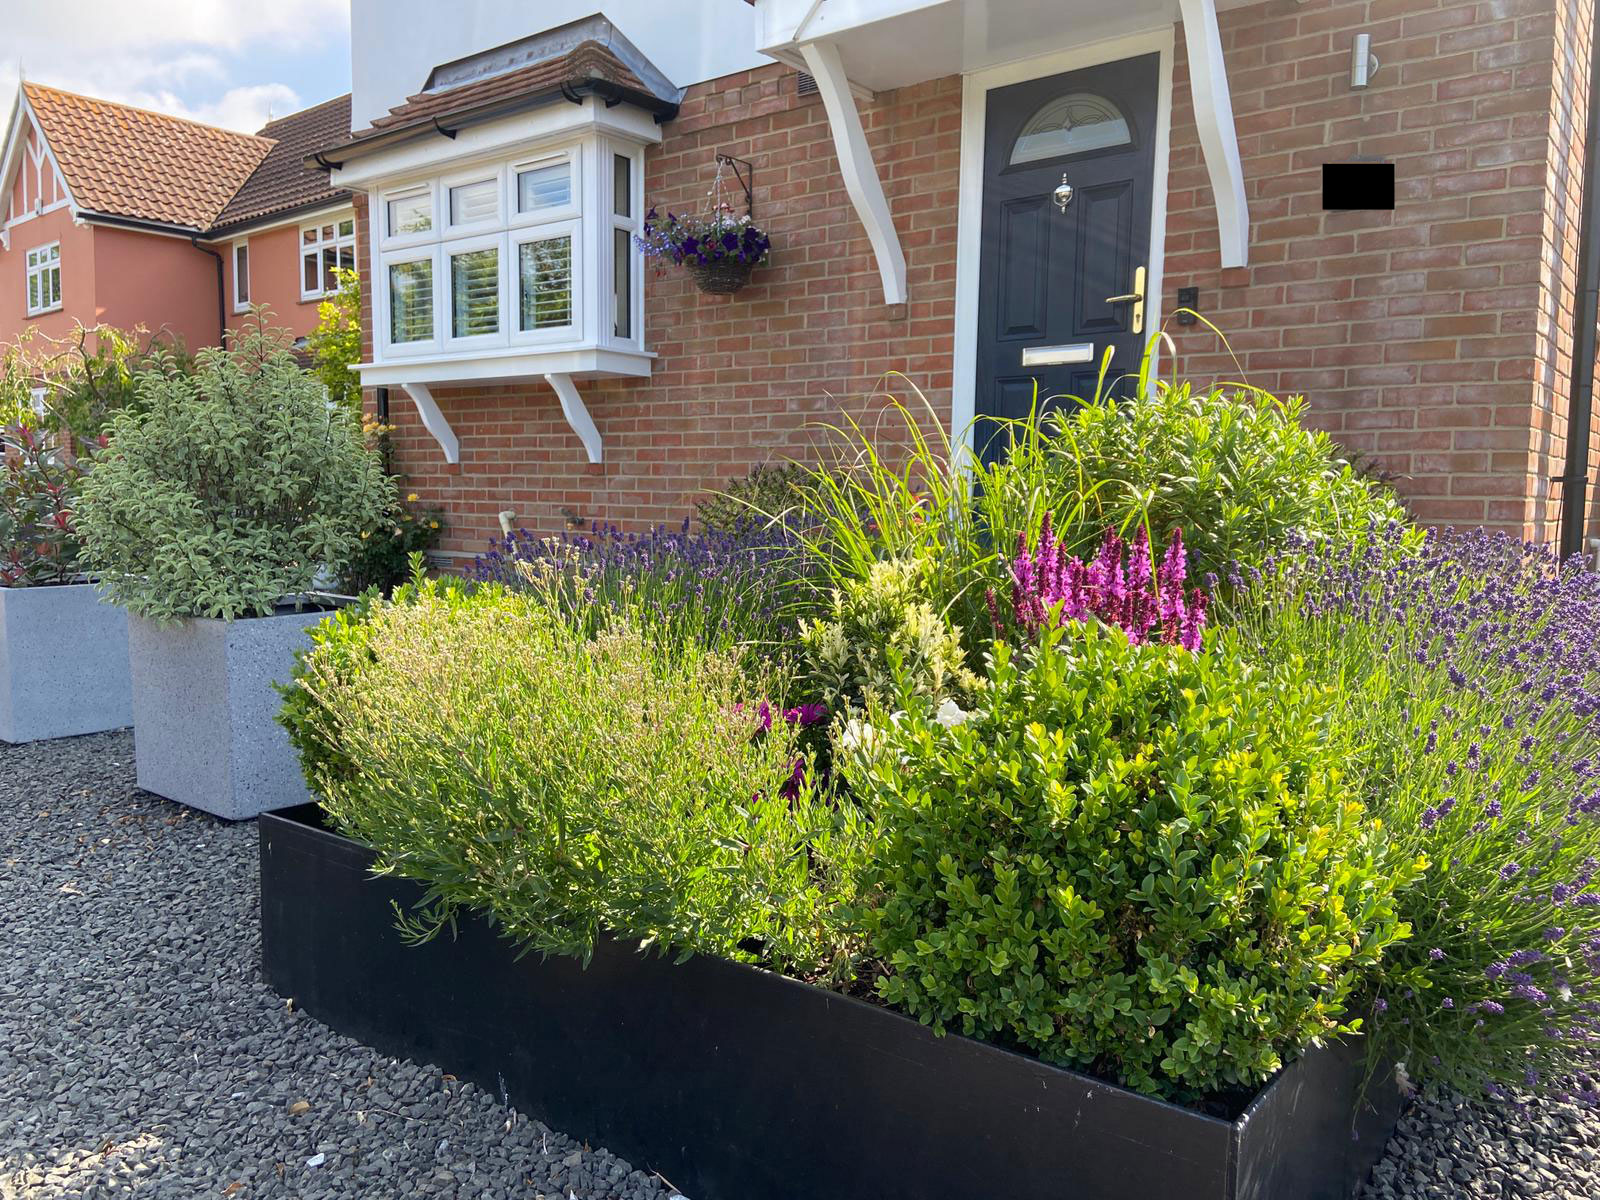 newbuild front garden with gravel surface and large planters full of shrubs and flowers